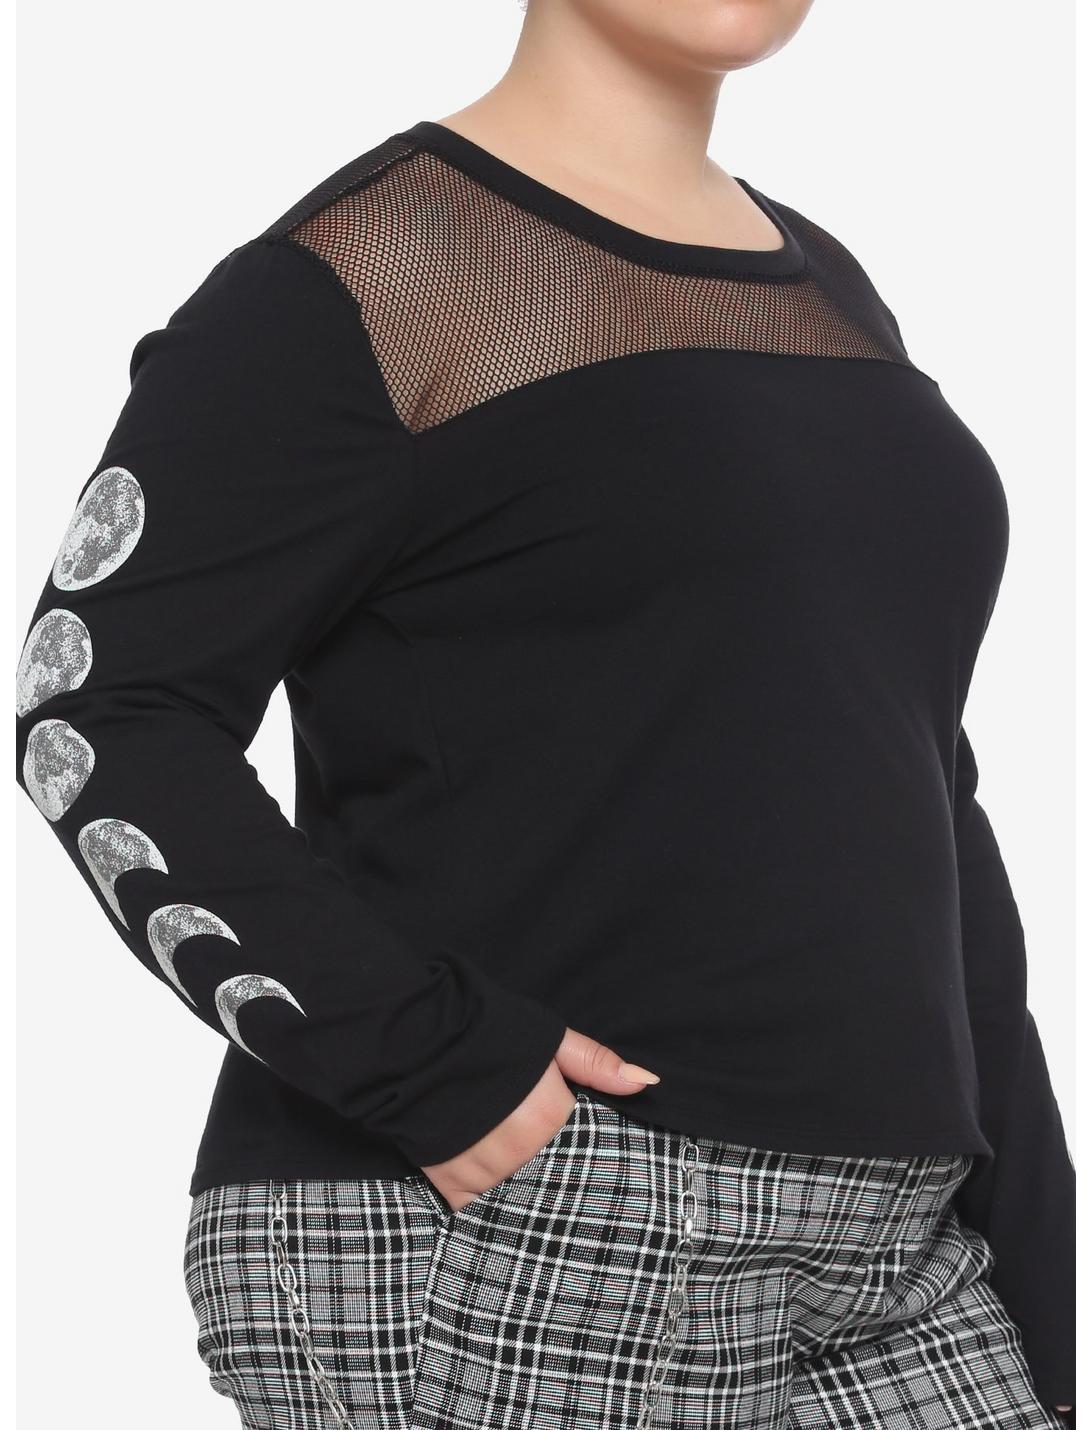 Moon Phases & Mesh Girls Long-Sleeve Top Plus Size, BLACK, hi-res